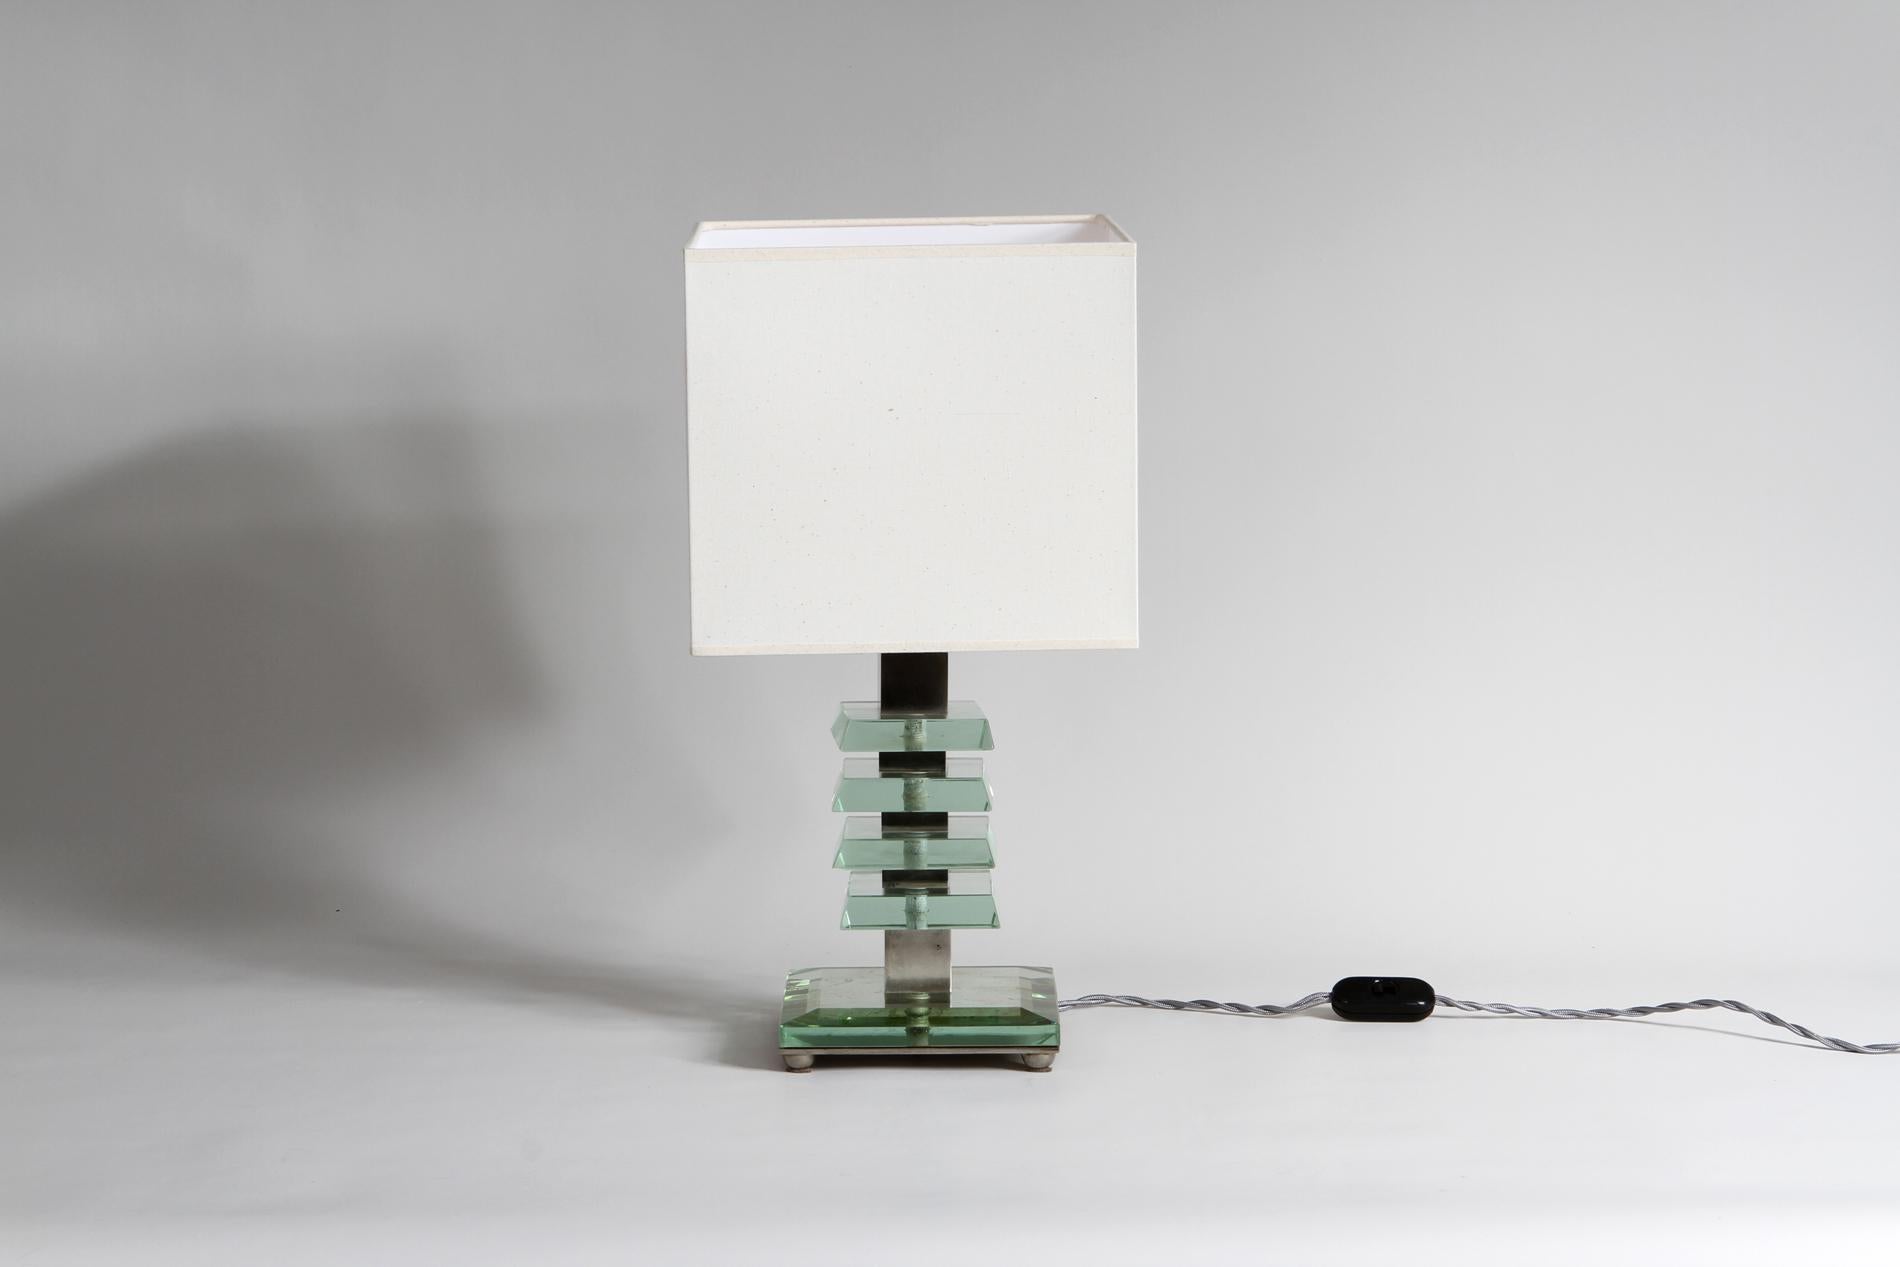 Modernist lamp by Maison Desny, consisting of 3 thick sheets of glass and nickel. Maison Desny was a leading Parisian Art Deco workshop, specializing in luxury modernist lamps featuring thick geometric glass and nickel-plated metal - stamped on the